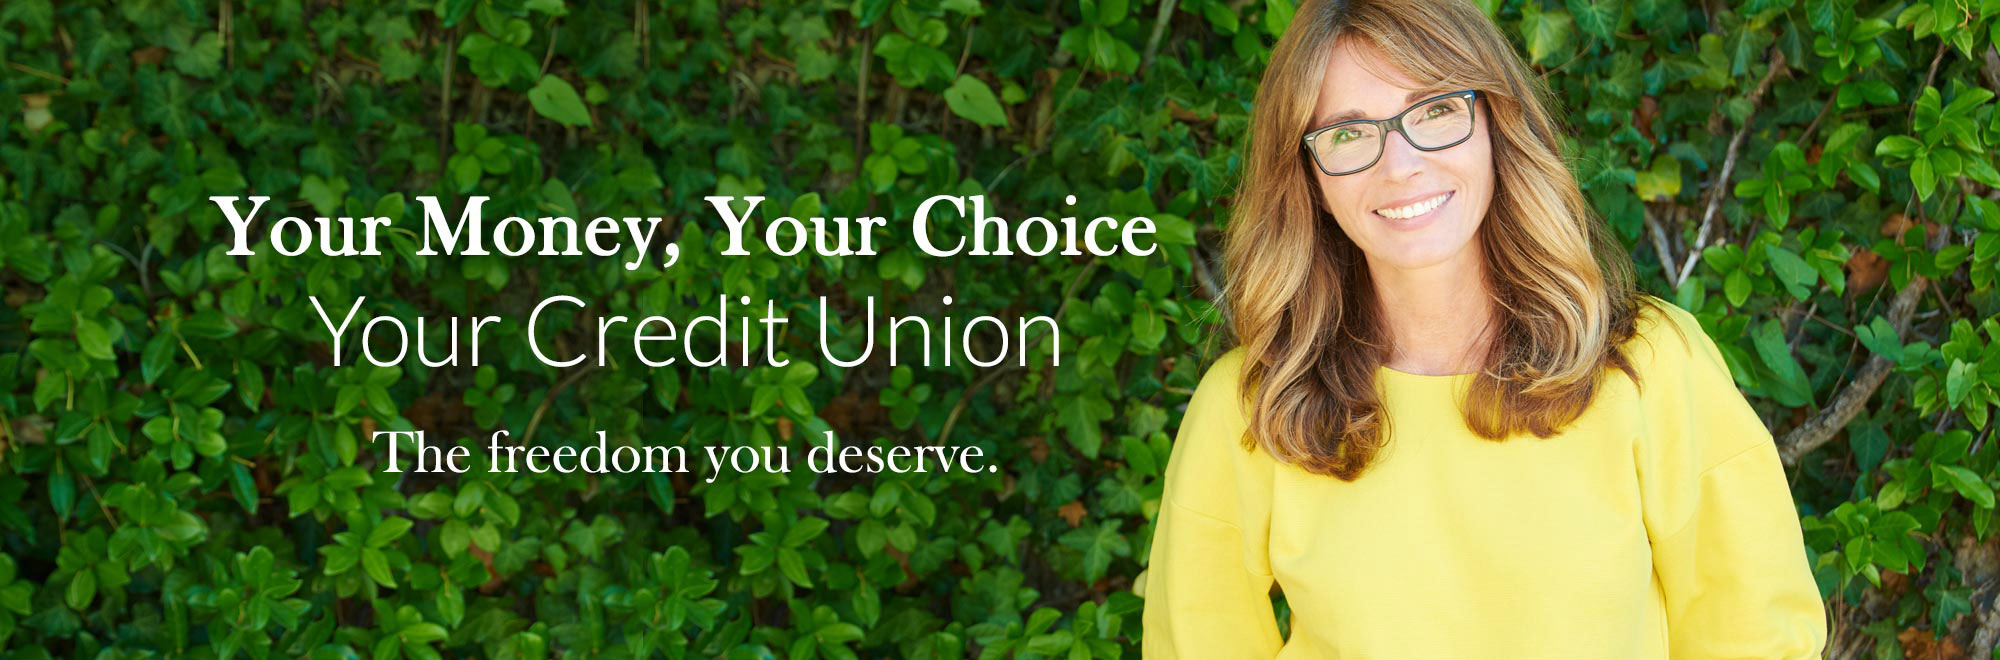 Your Money. Your Choice. Your Credit Union